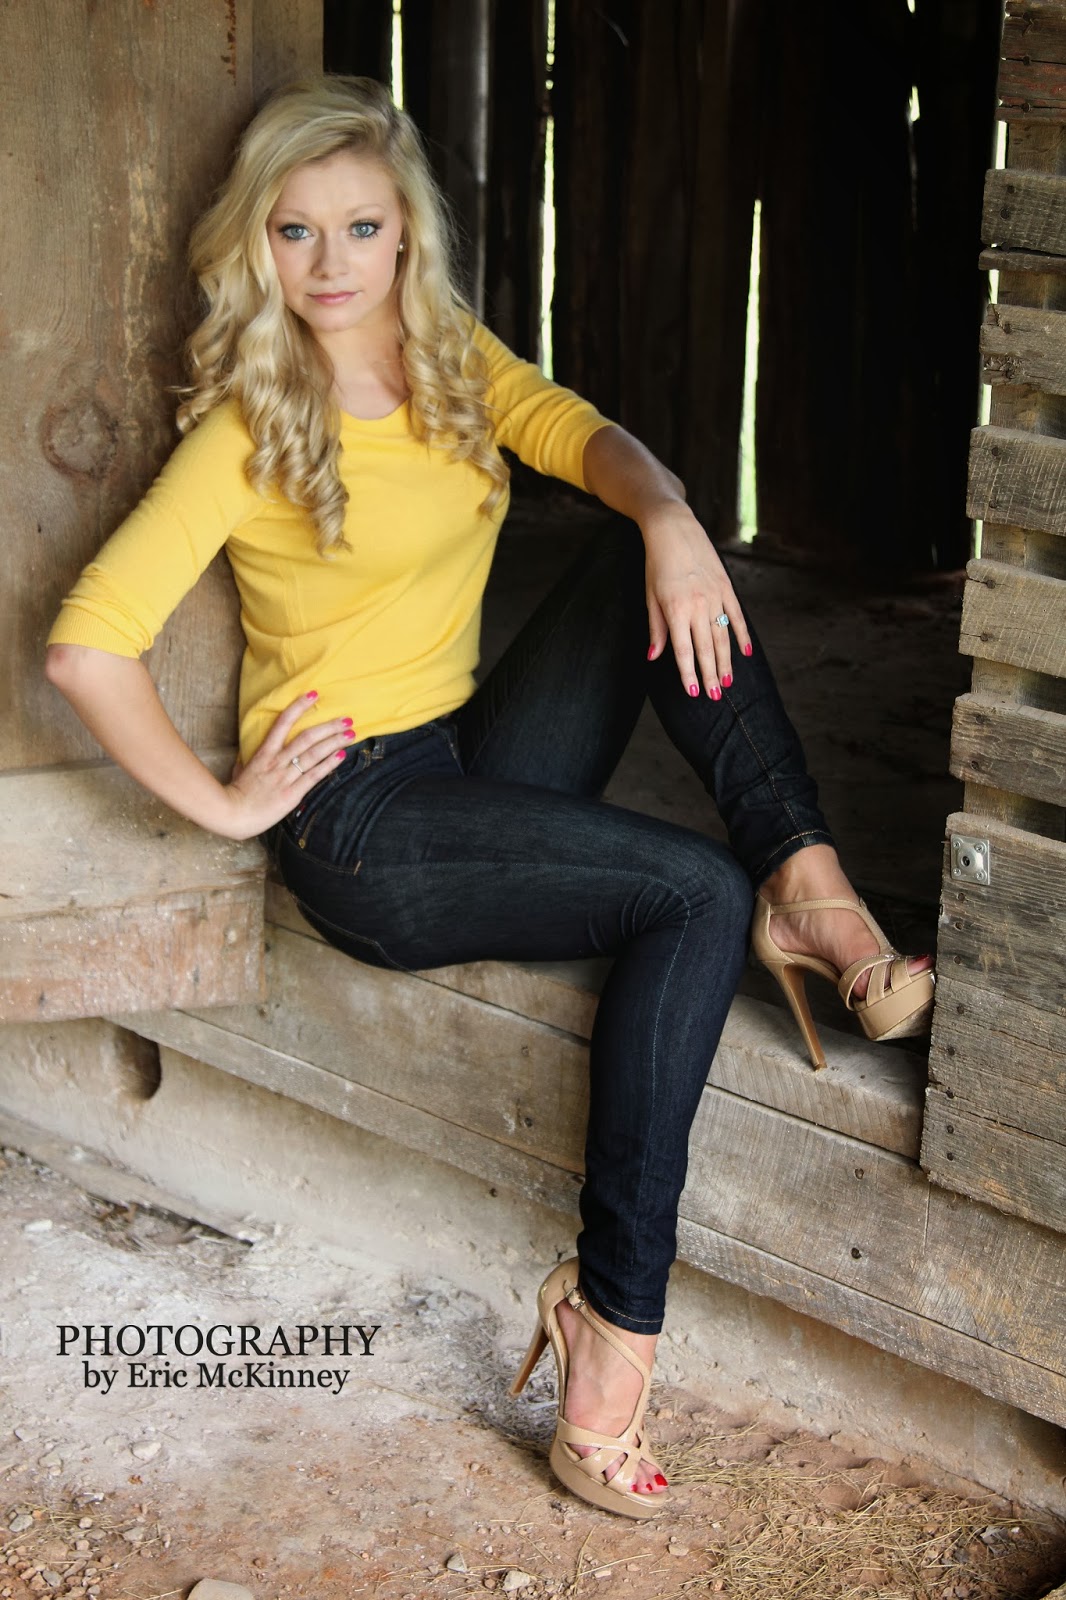 6:12 Photography by Eric McKinney: Fall Portraits: Model 